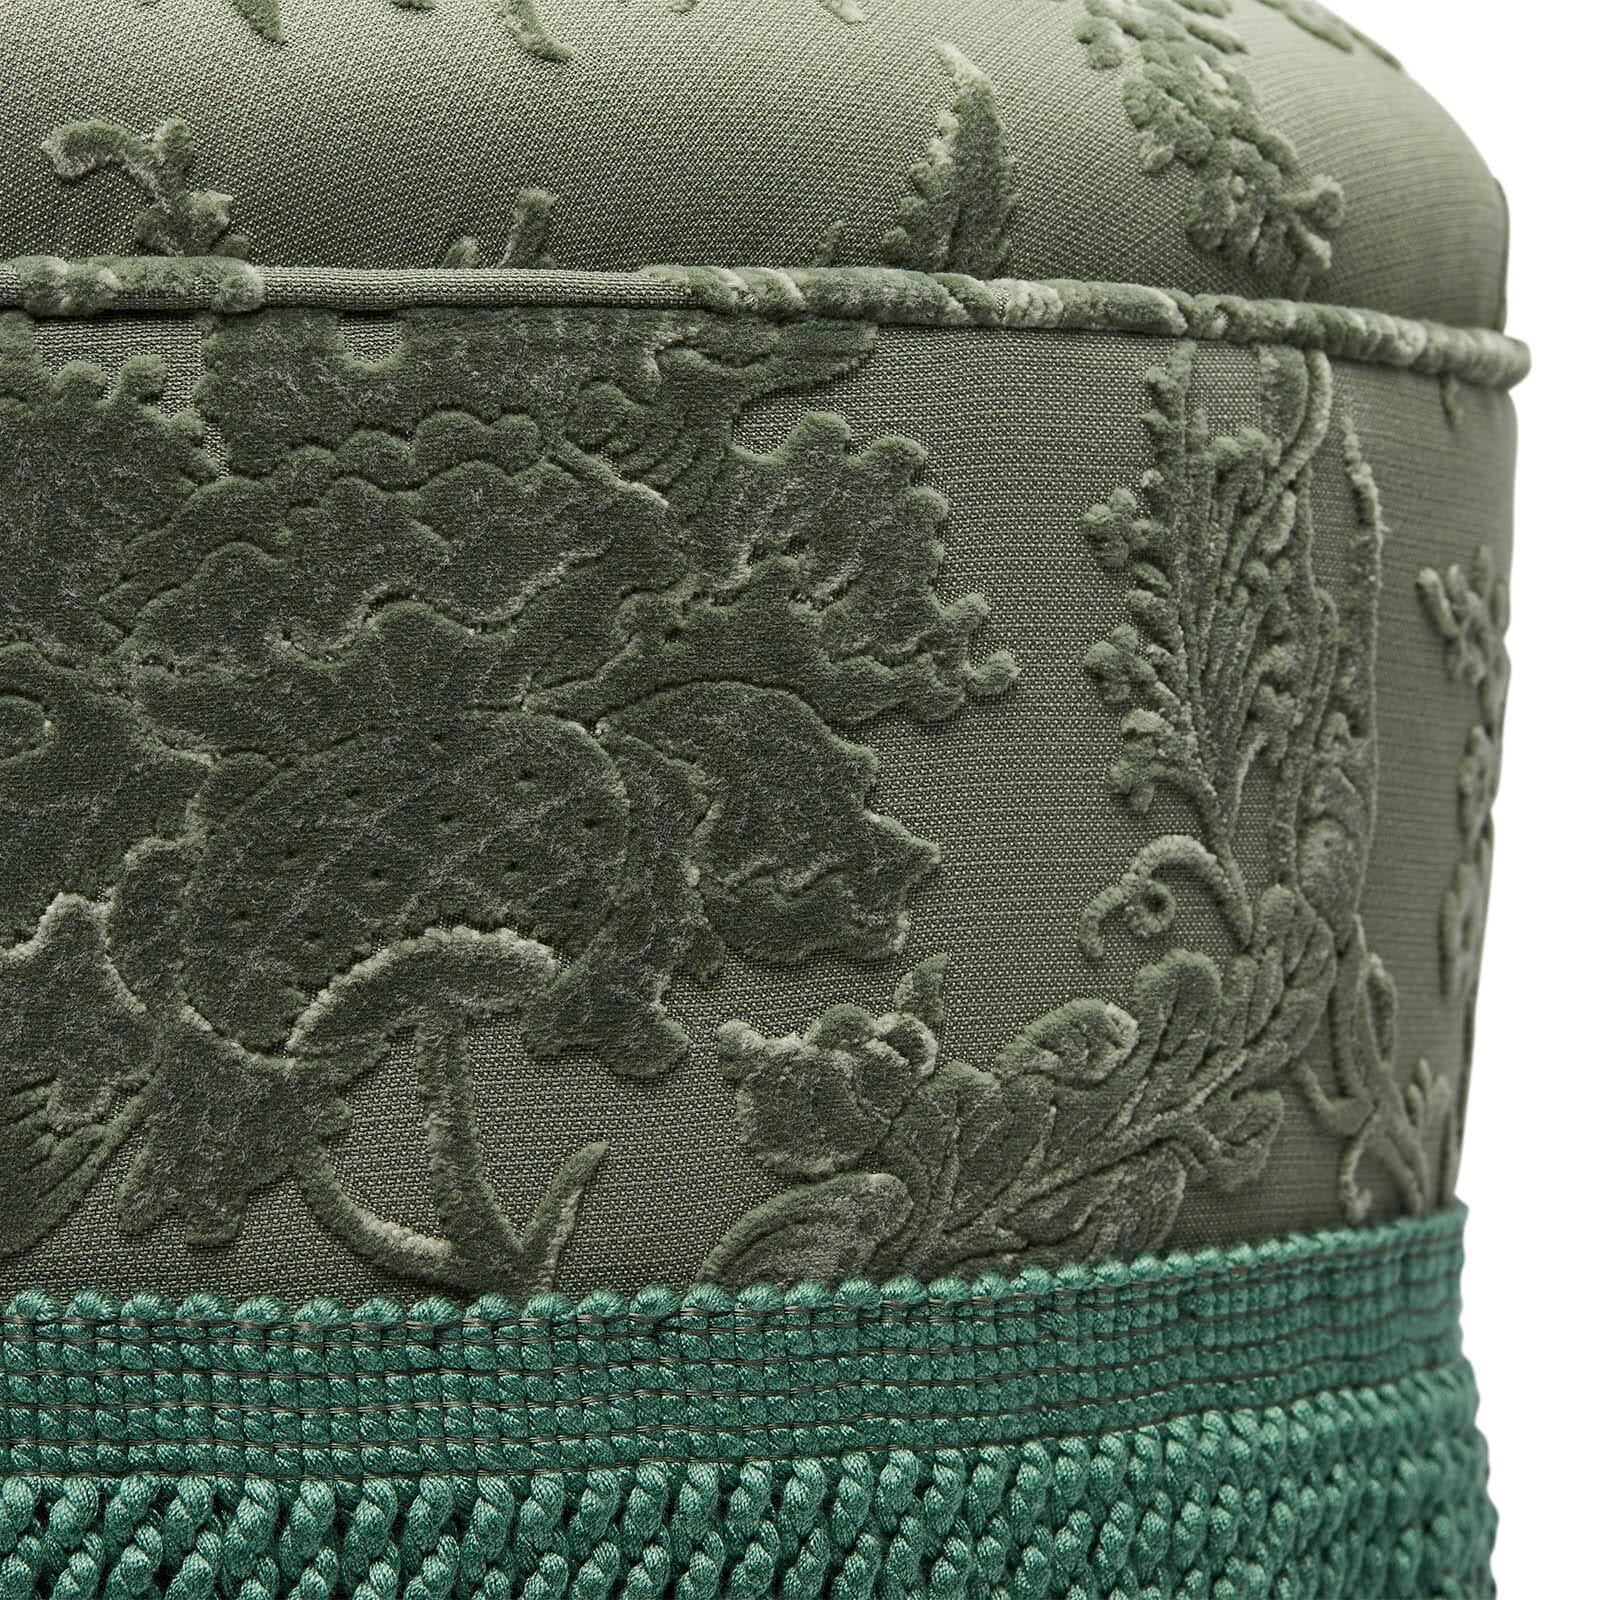 The Bottoman is a tongue in cheek take on the ottoman seat, crafted by the finest furniture makers in England. Upholstered in ARTEMIS cut velvet in a verdant ‘Eucalyptus’ green, this design is finished with finesse with handmade bullion, adding a